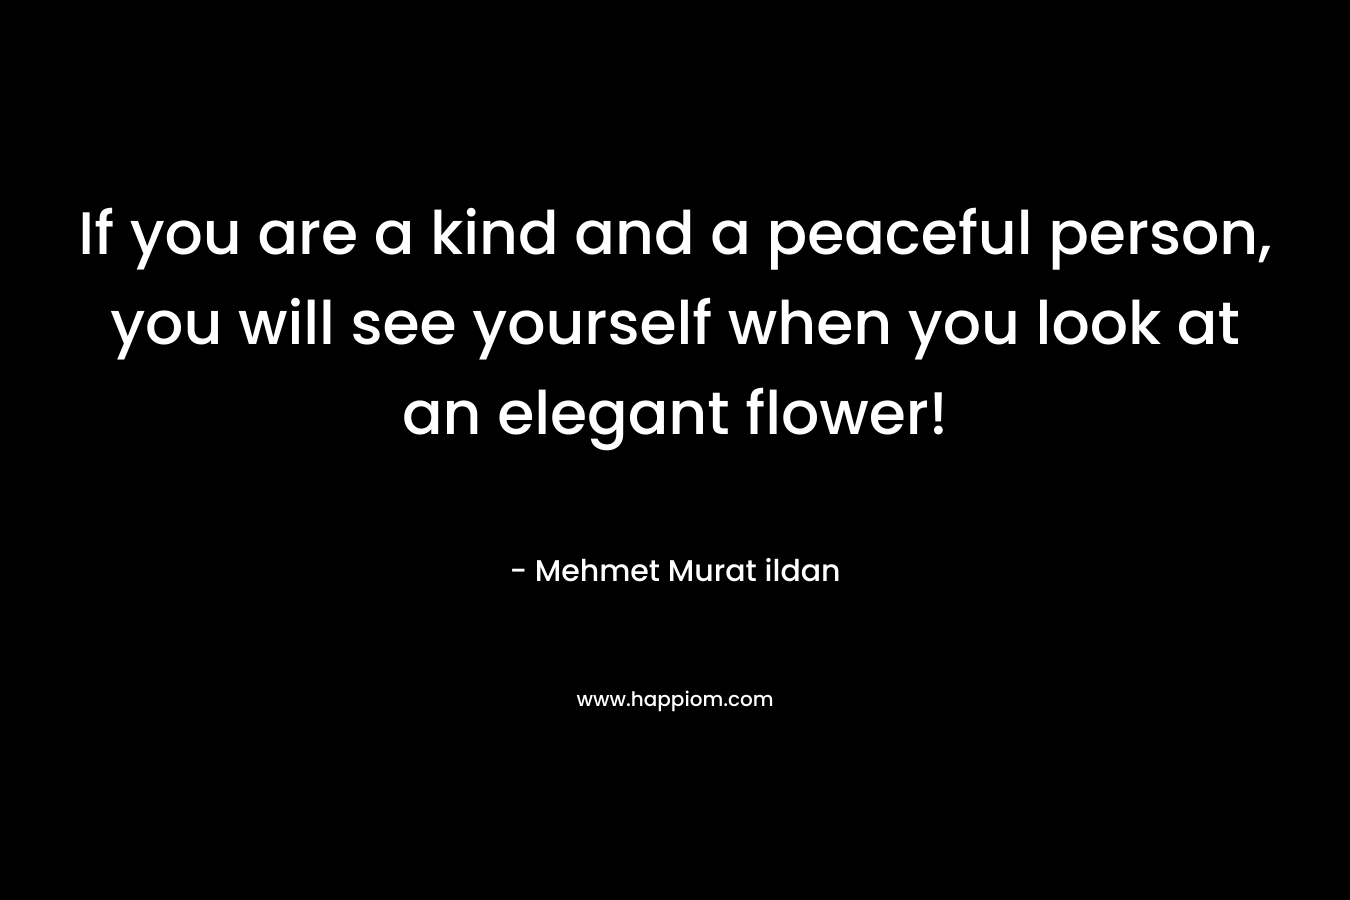 If you are a kind and a peaceful person, you will see yourself when you look at an elegant flower! – Mehmet Murat ildan